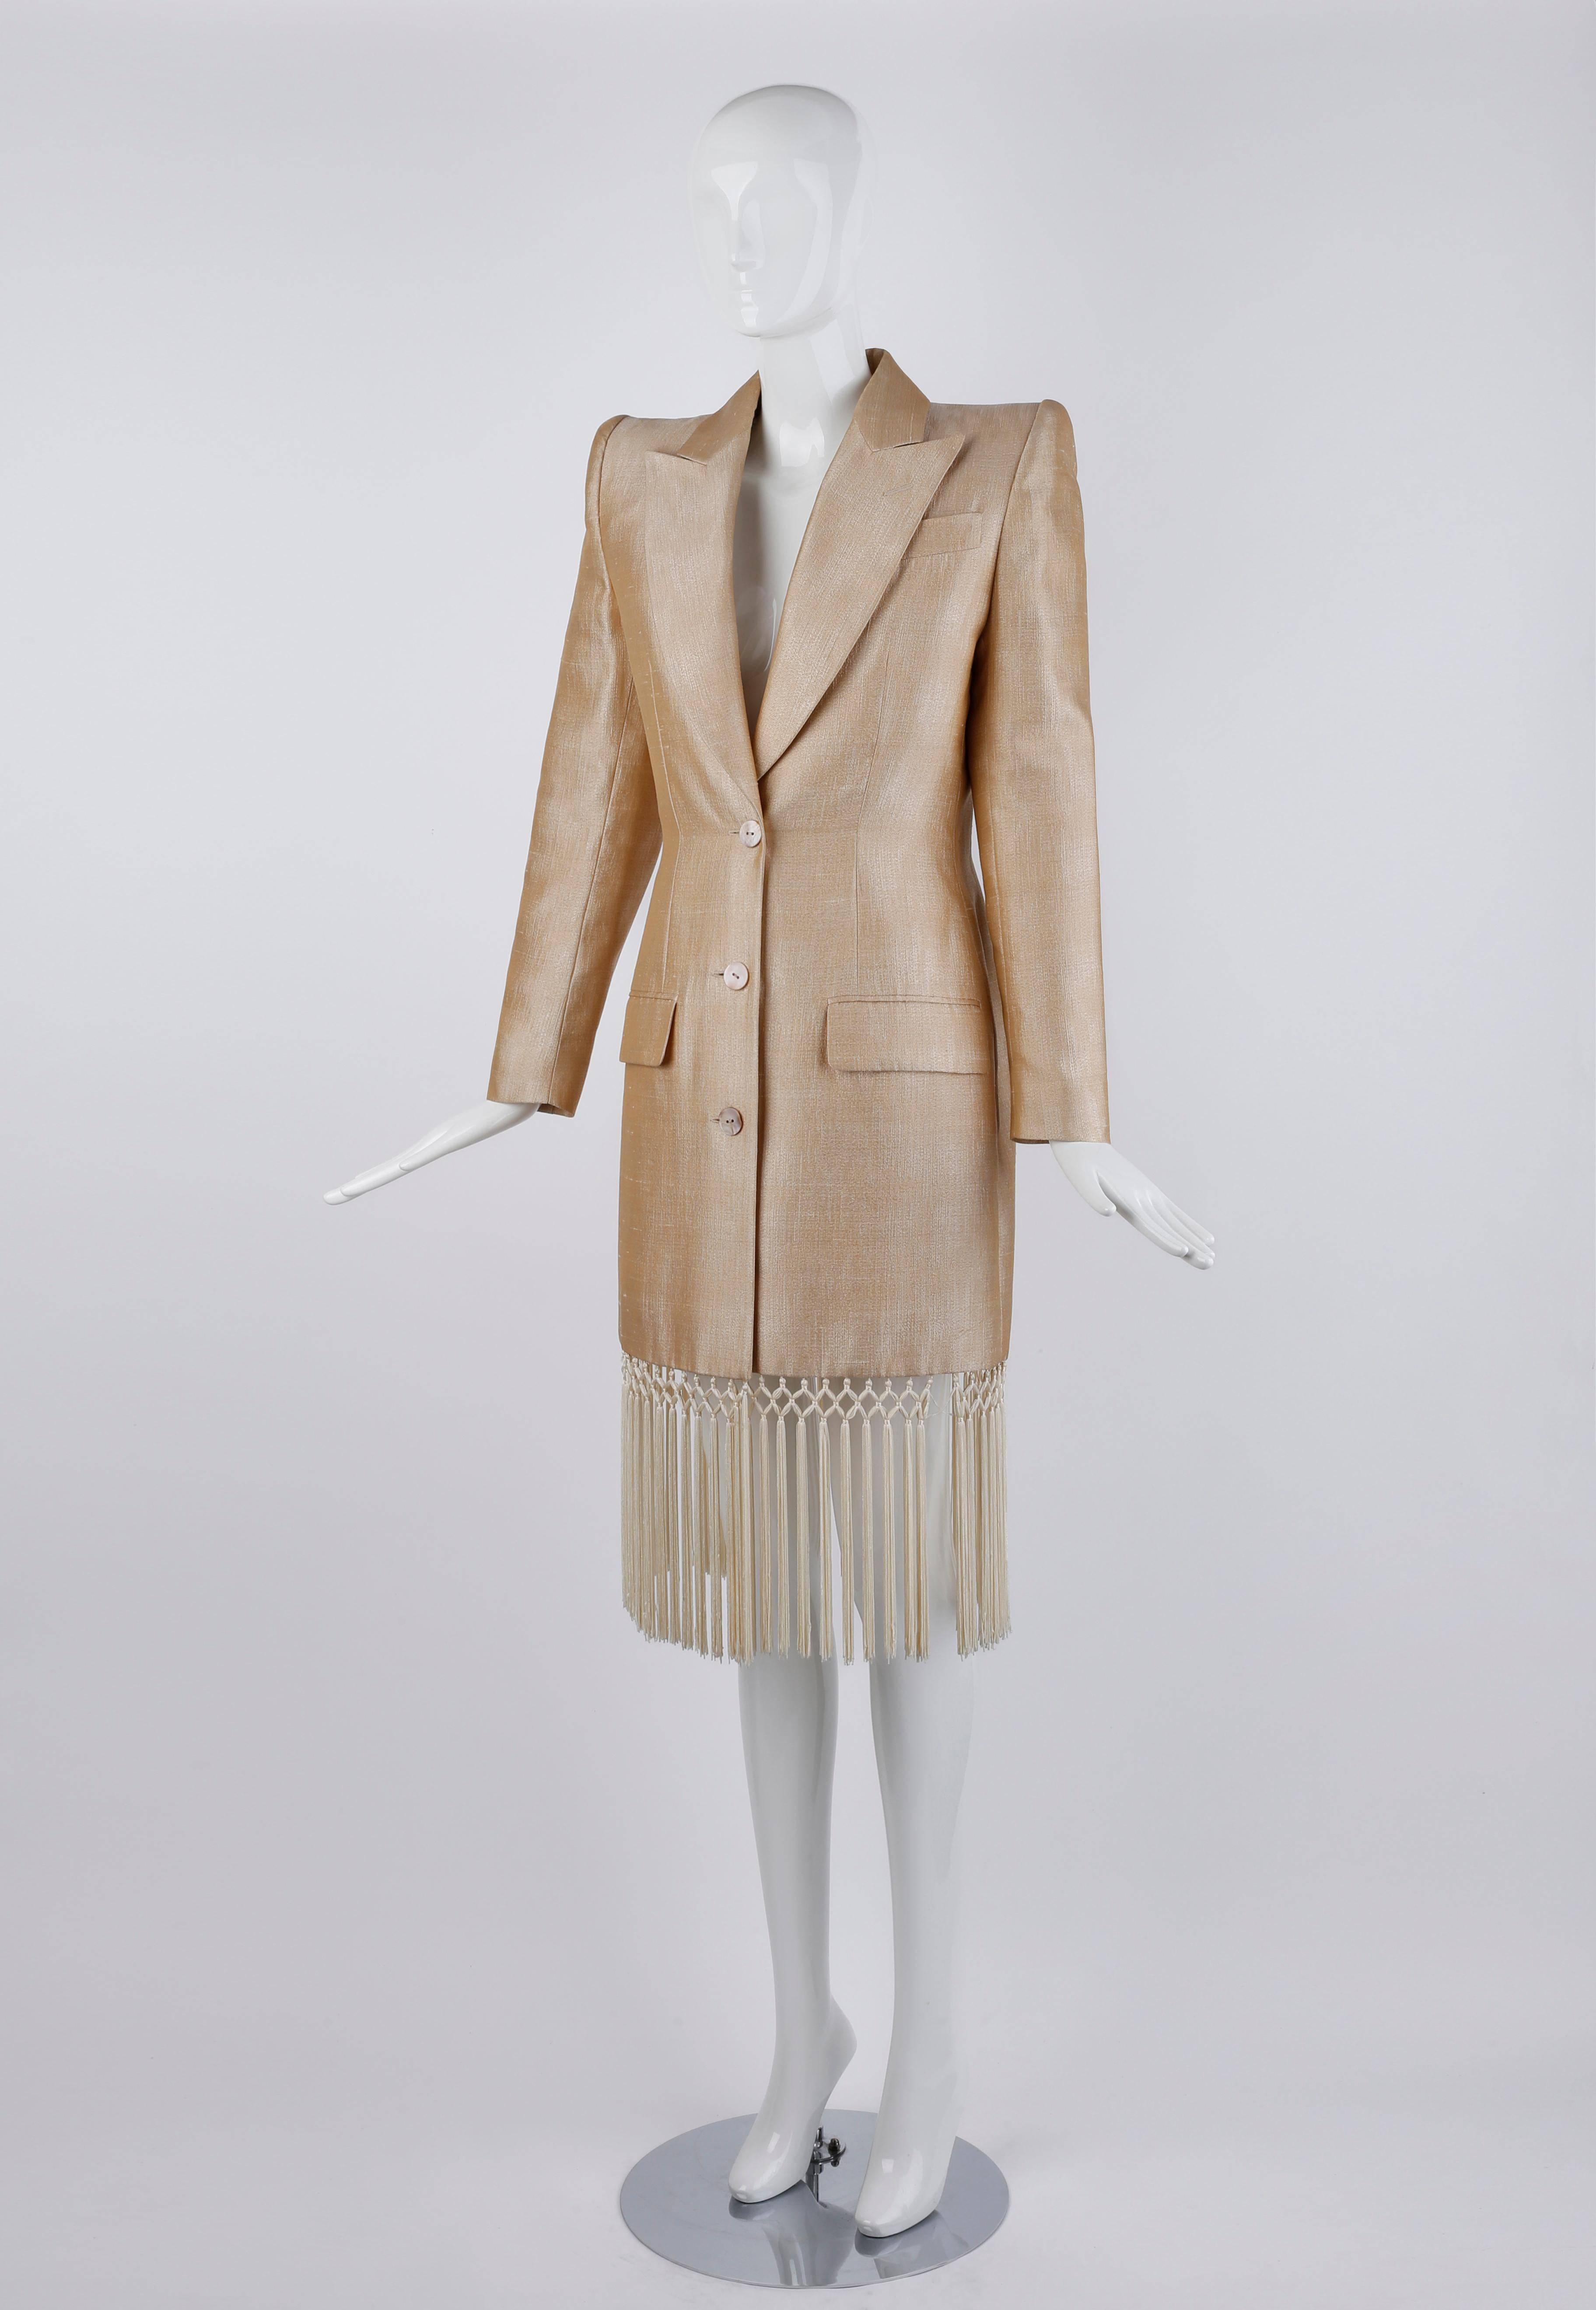 Givenchy Couture Alexander McQueen S/S 1998 Champagne Silk Tassel Dress Coat In Good Condition For Sale In Chicago, IL